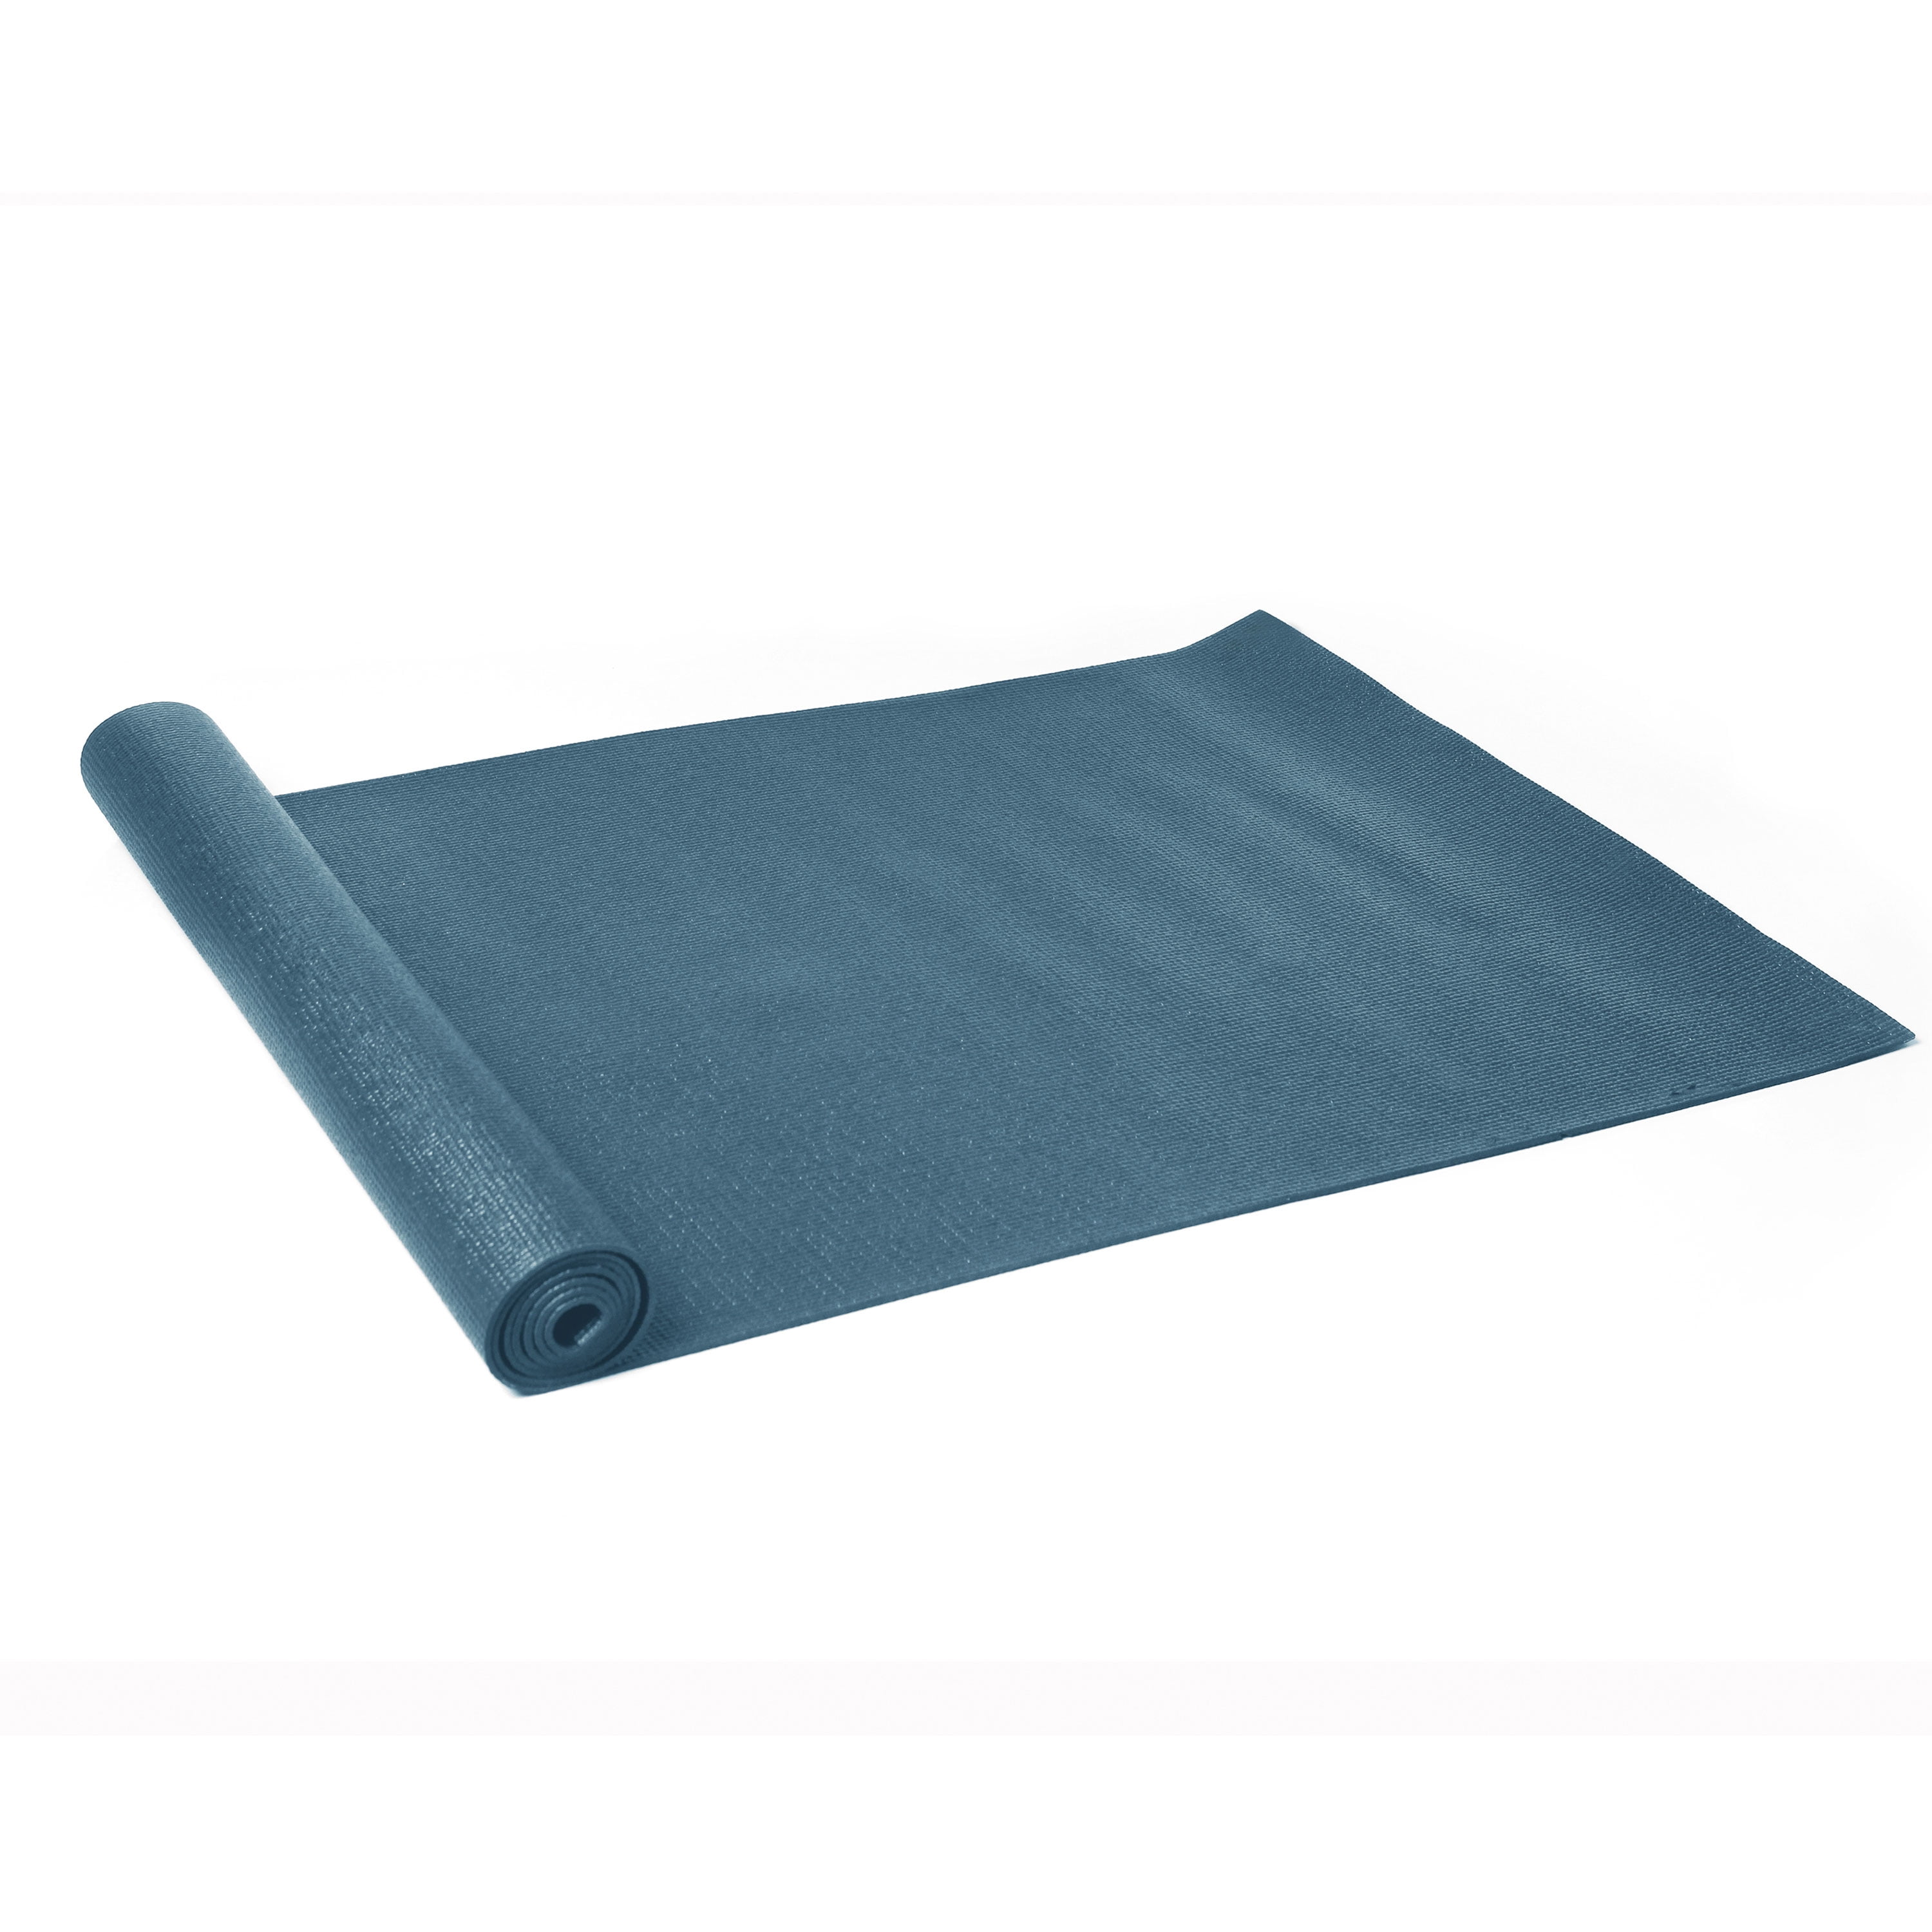 Athletic Works Mat, 3mm, Dark Gray, 68inx24in, Non Slip, Cushioning for Support and - Walmart.com